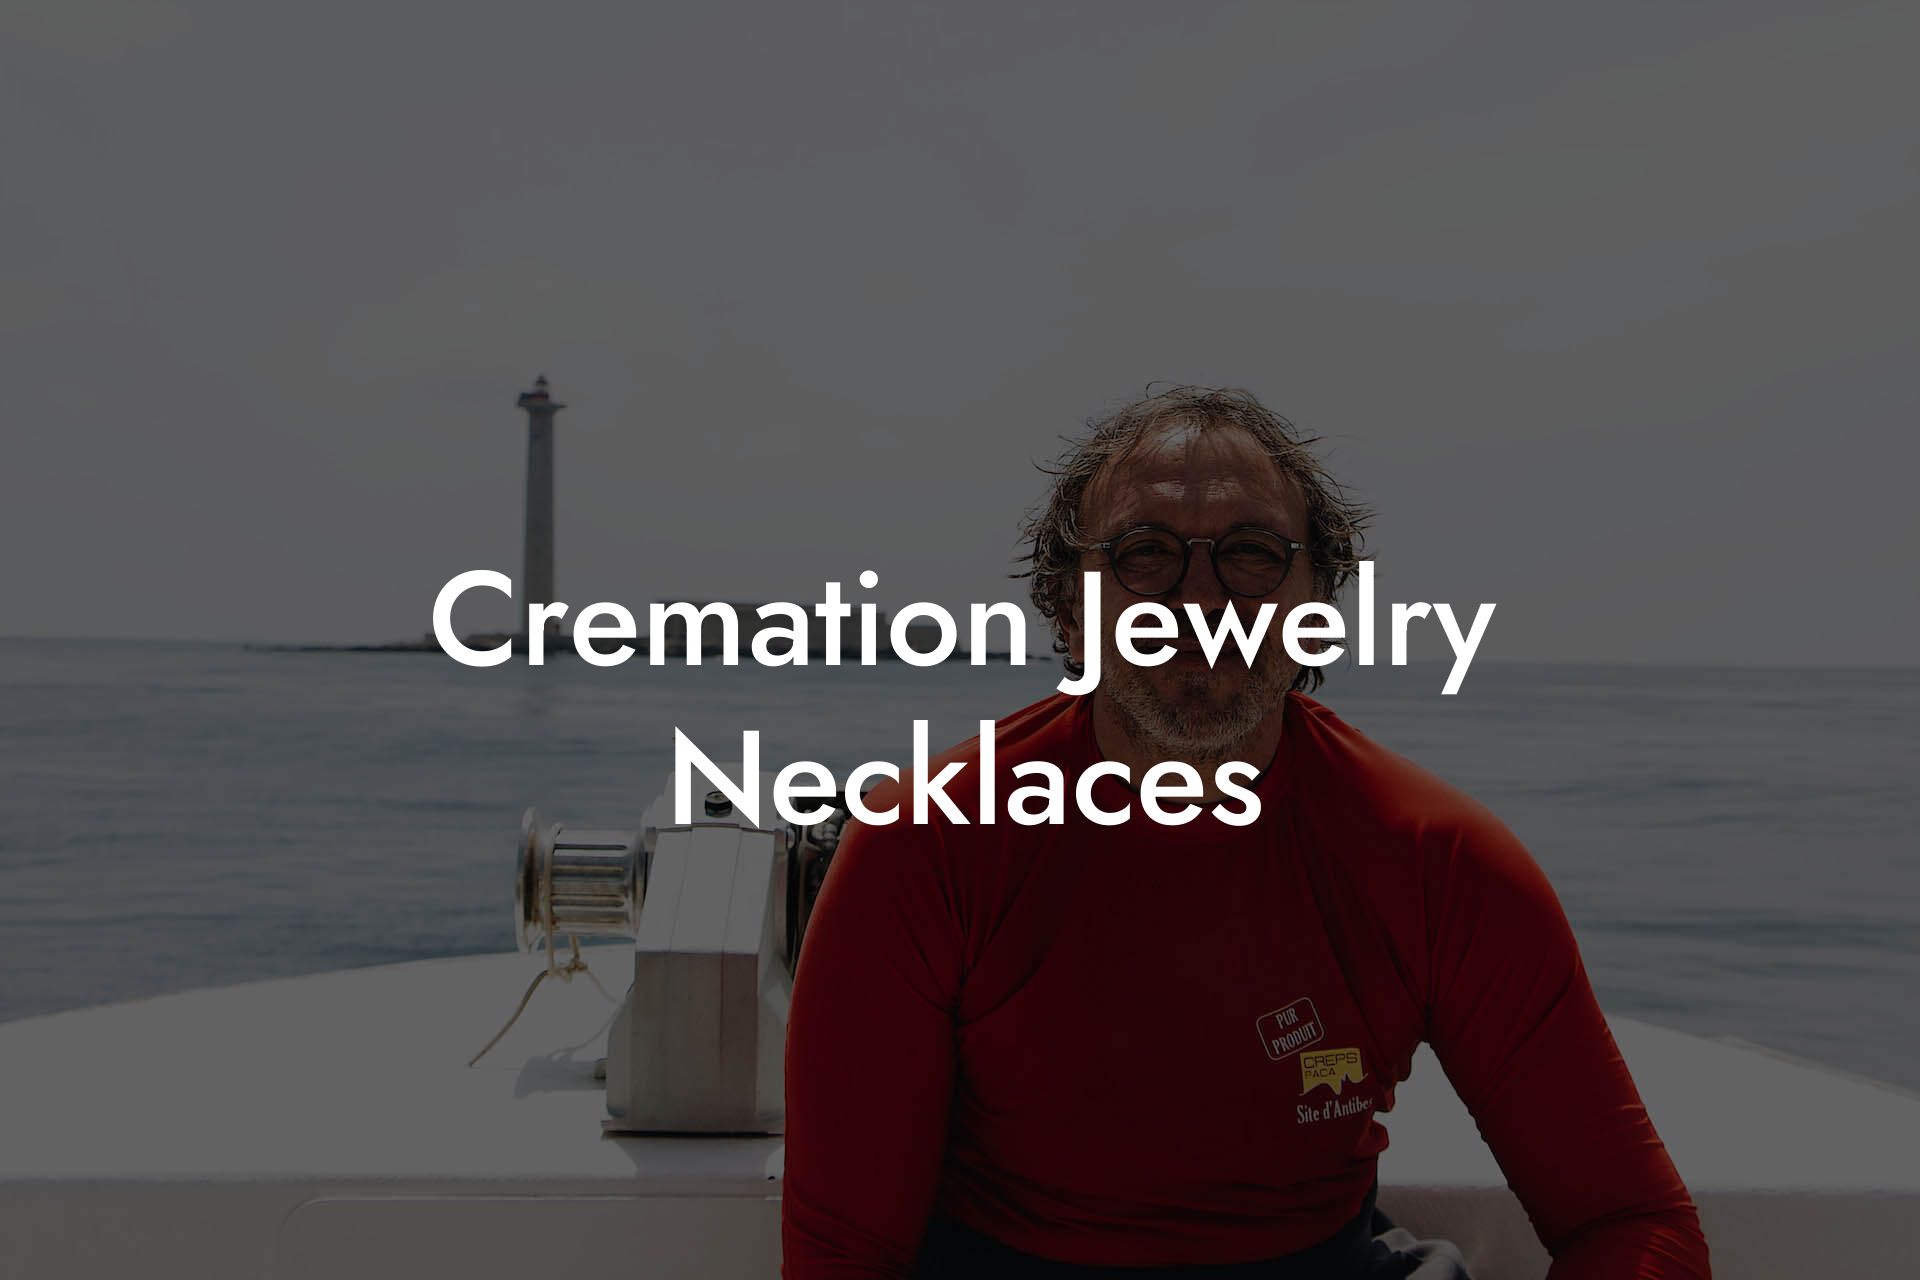 Cremation Jewelry Necklaces